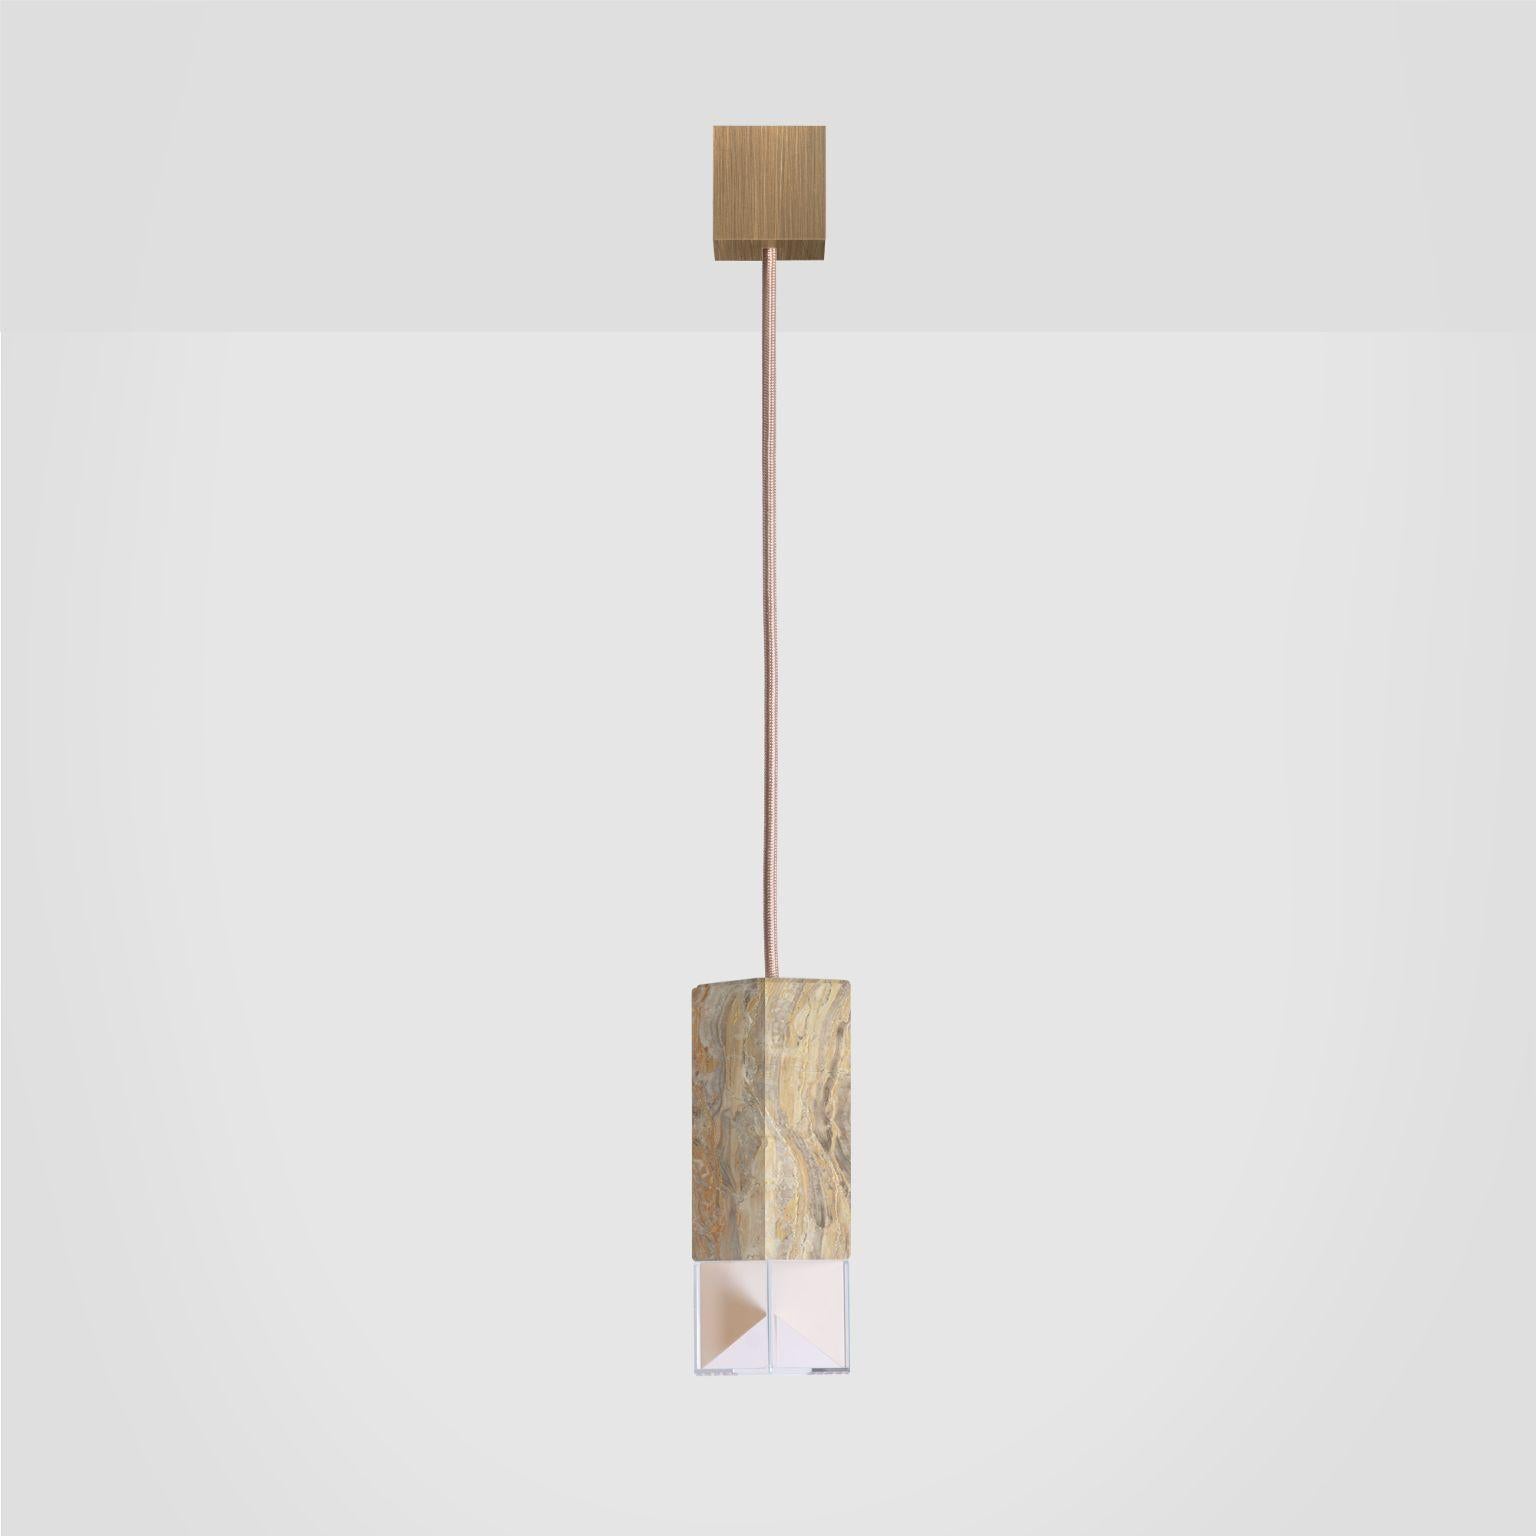 Lamp one marble 02 revamp edition by Formaminima
Dimensions: D 5 x W 5 x H 17 cm
Materials: Body lamp: handcrafted solid Arabescato Orobico grey and orange, polished finish, Crystal glass diffuser, Limoges porcelain sheets, biscuit-finish. Ceiling